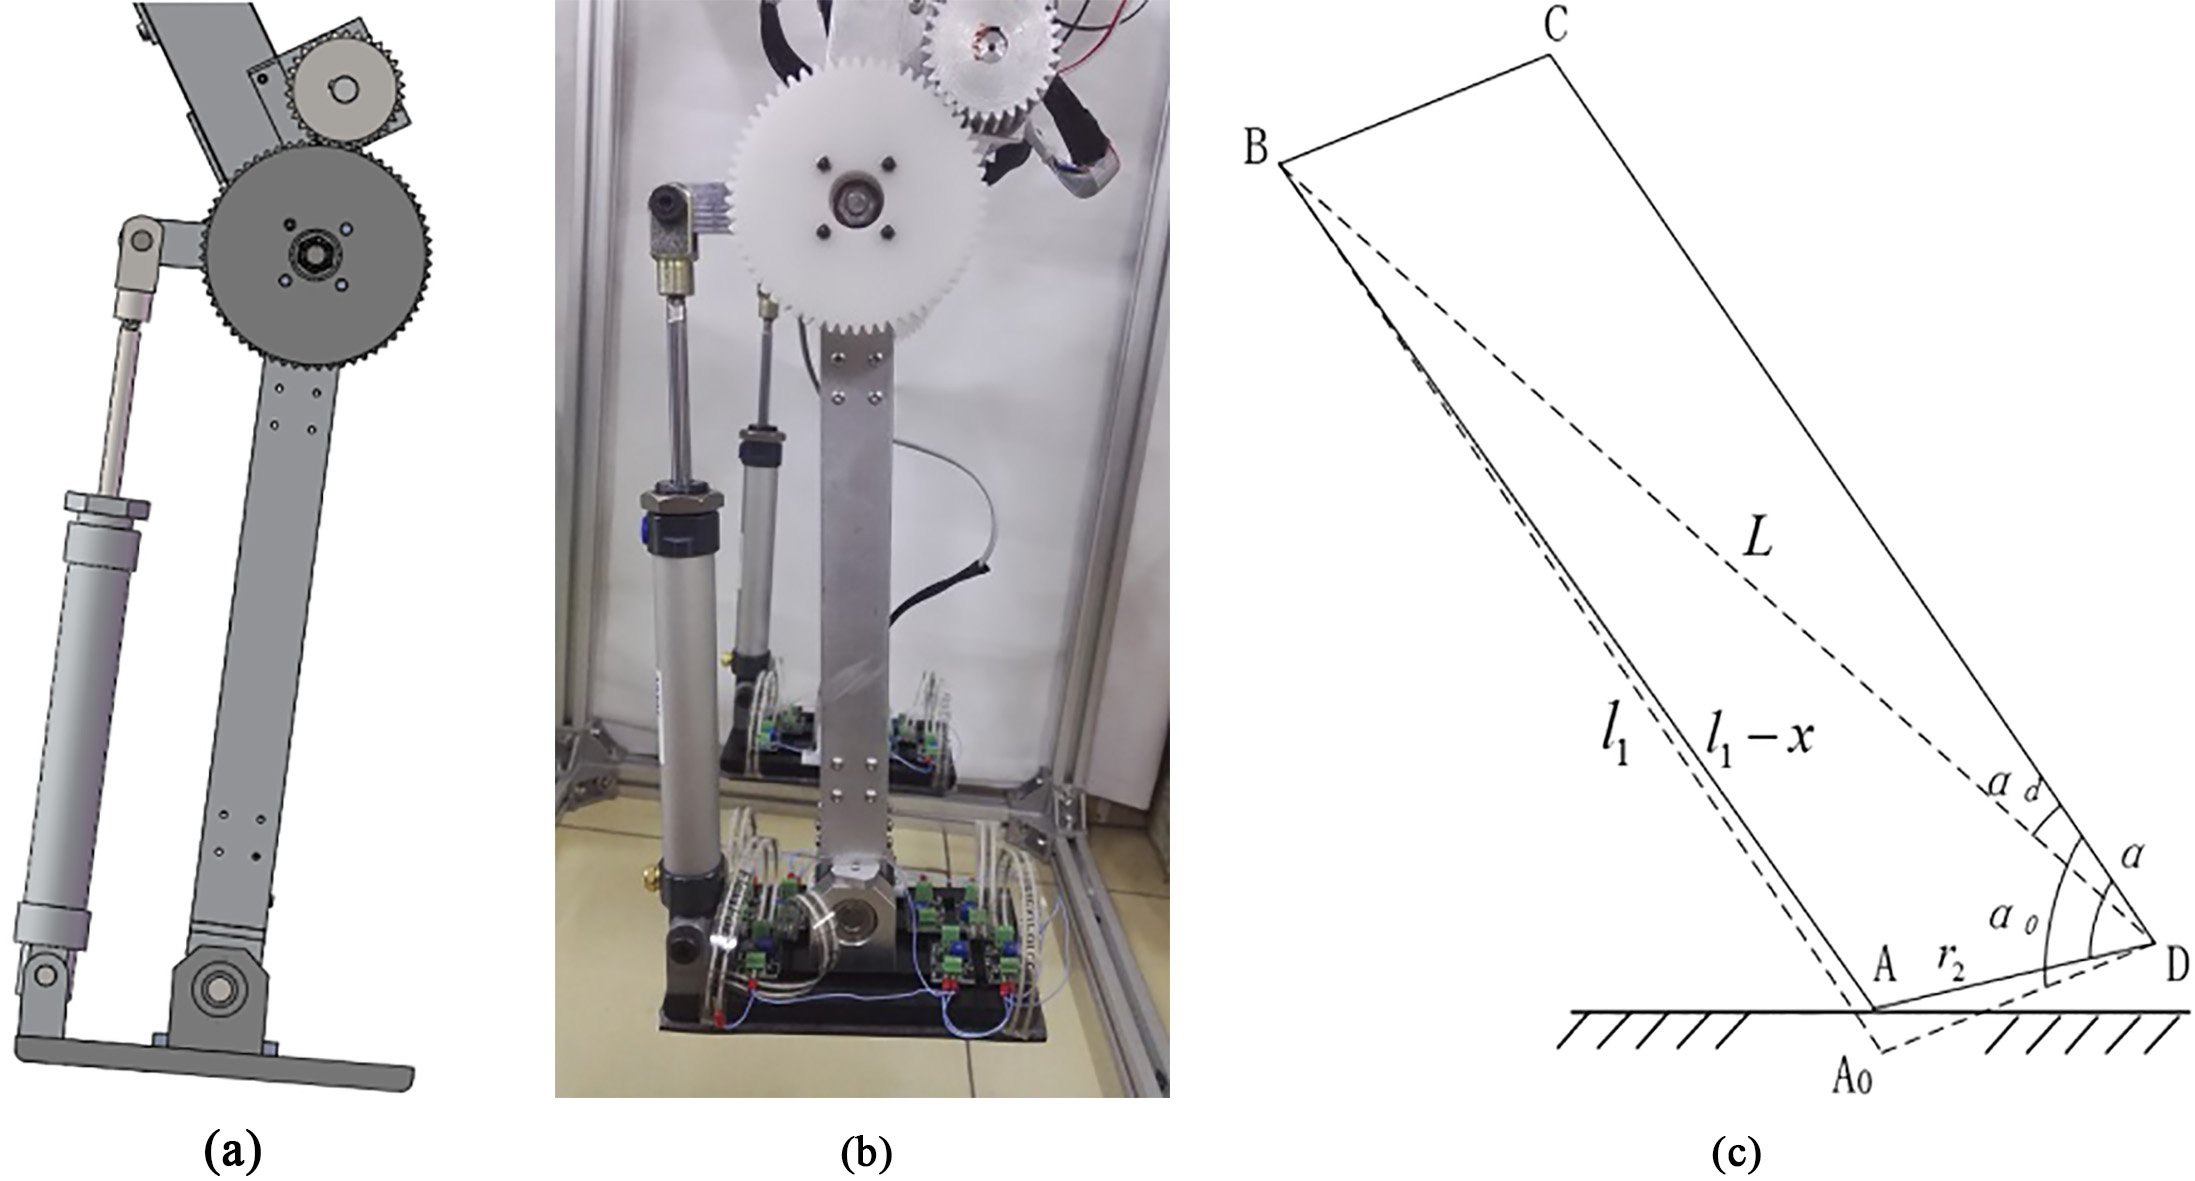 Design of the variable ankle joint. (a) Components used in the ankle joint. (b) Prototype of biped robot. (c) Abstract model of the ankle joint.